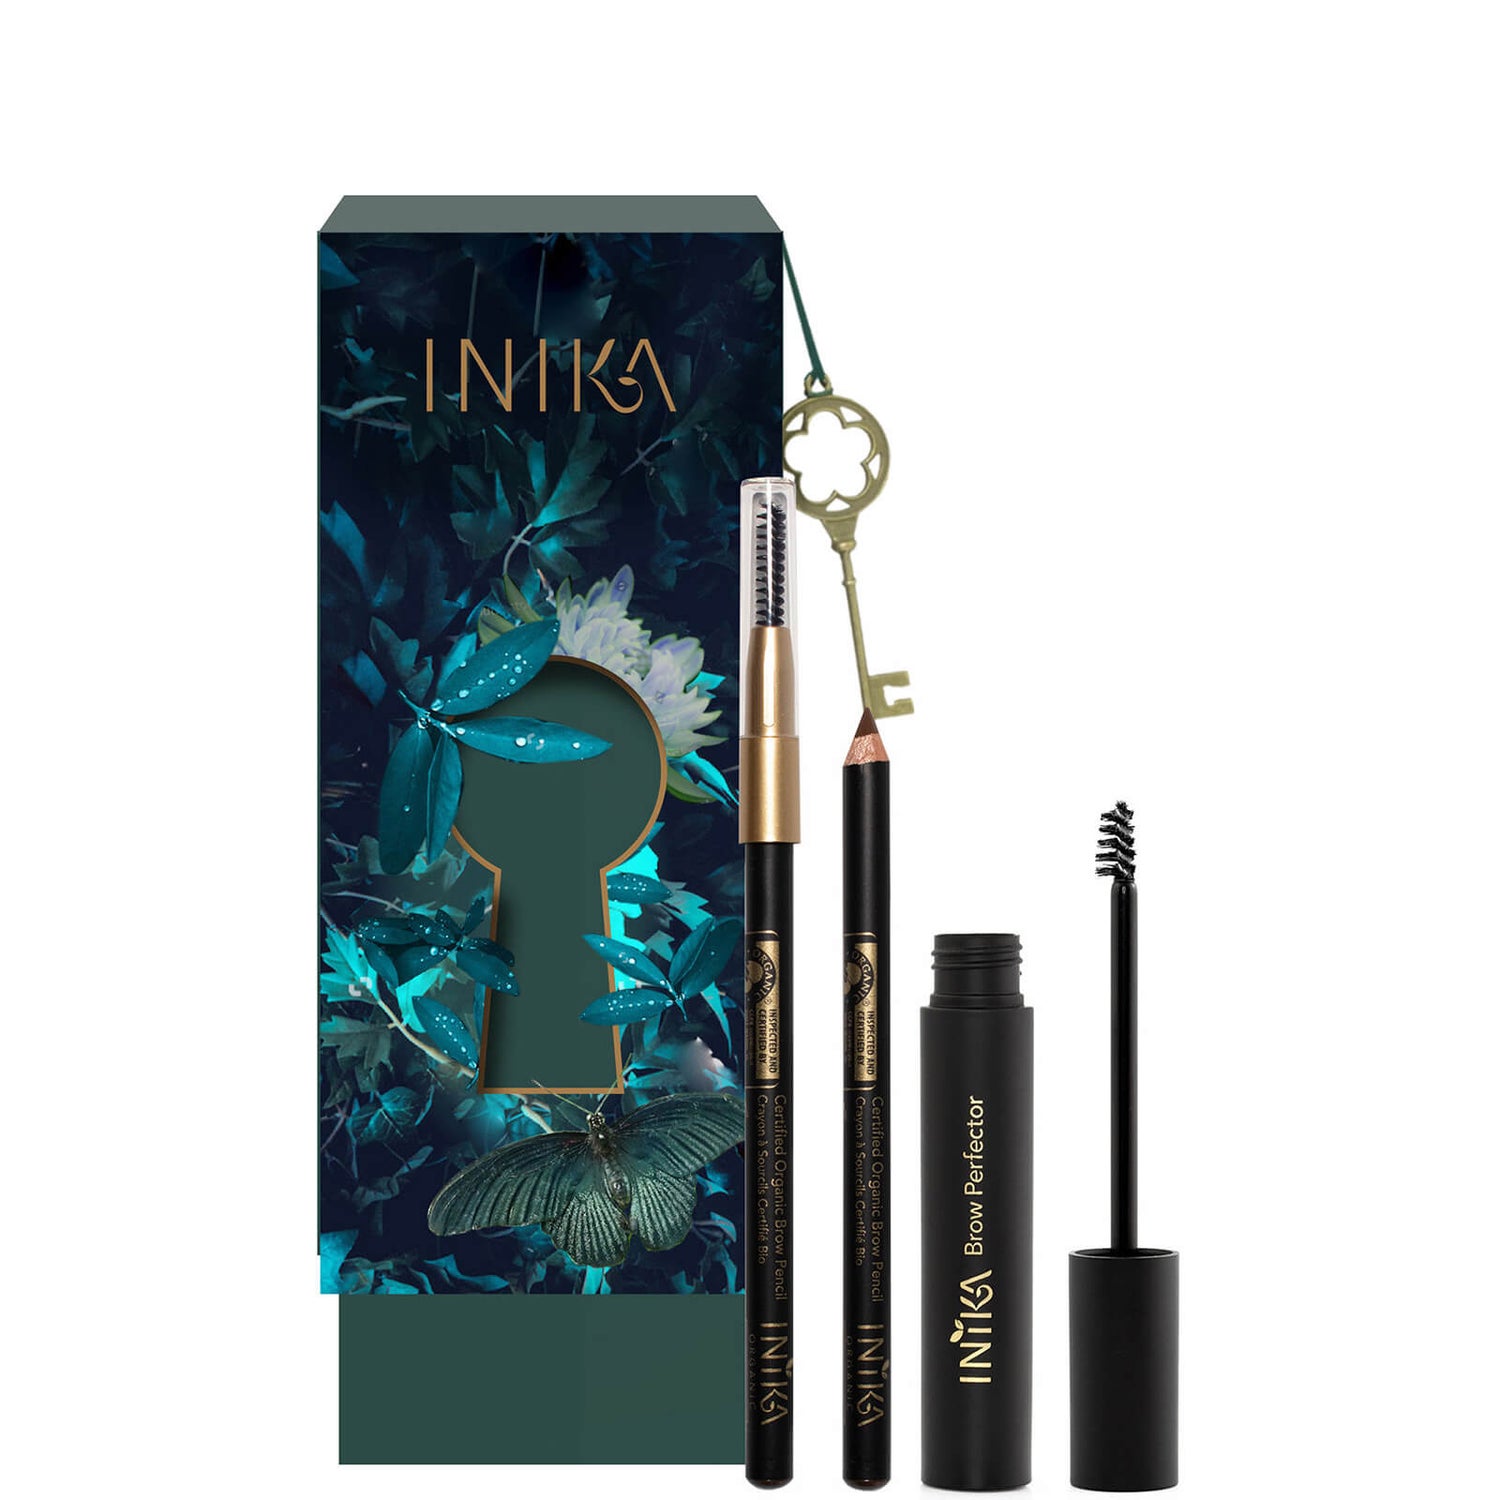 INIKA Certified Organic Precision Brows - Walnut and Brunette 9.2g